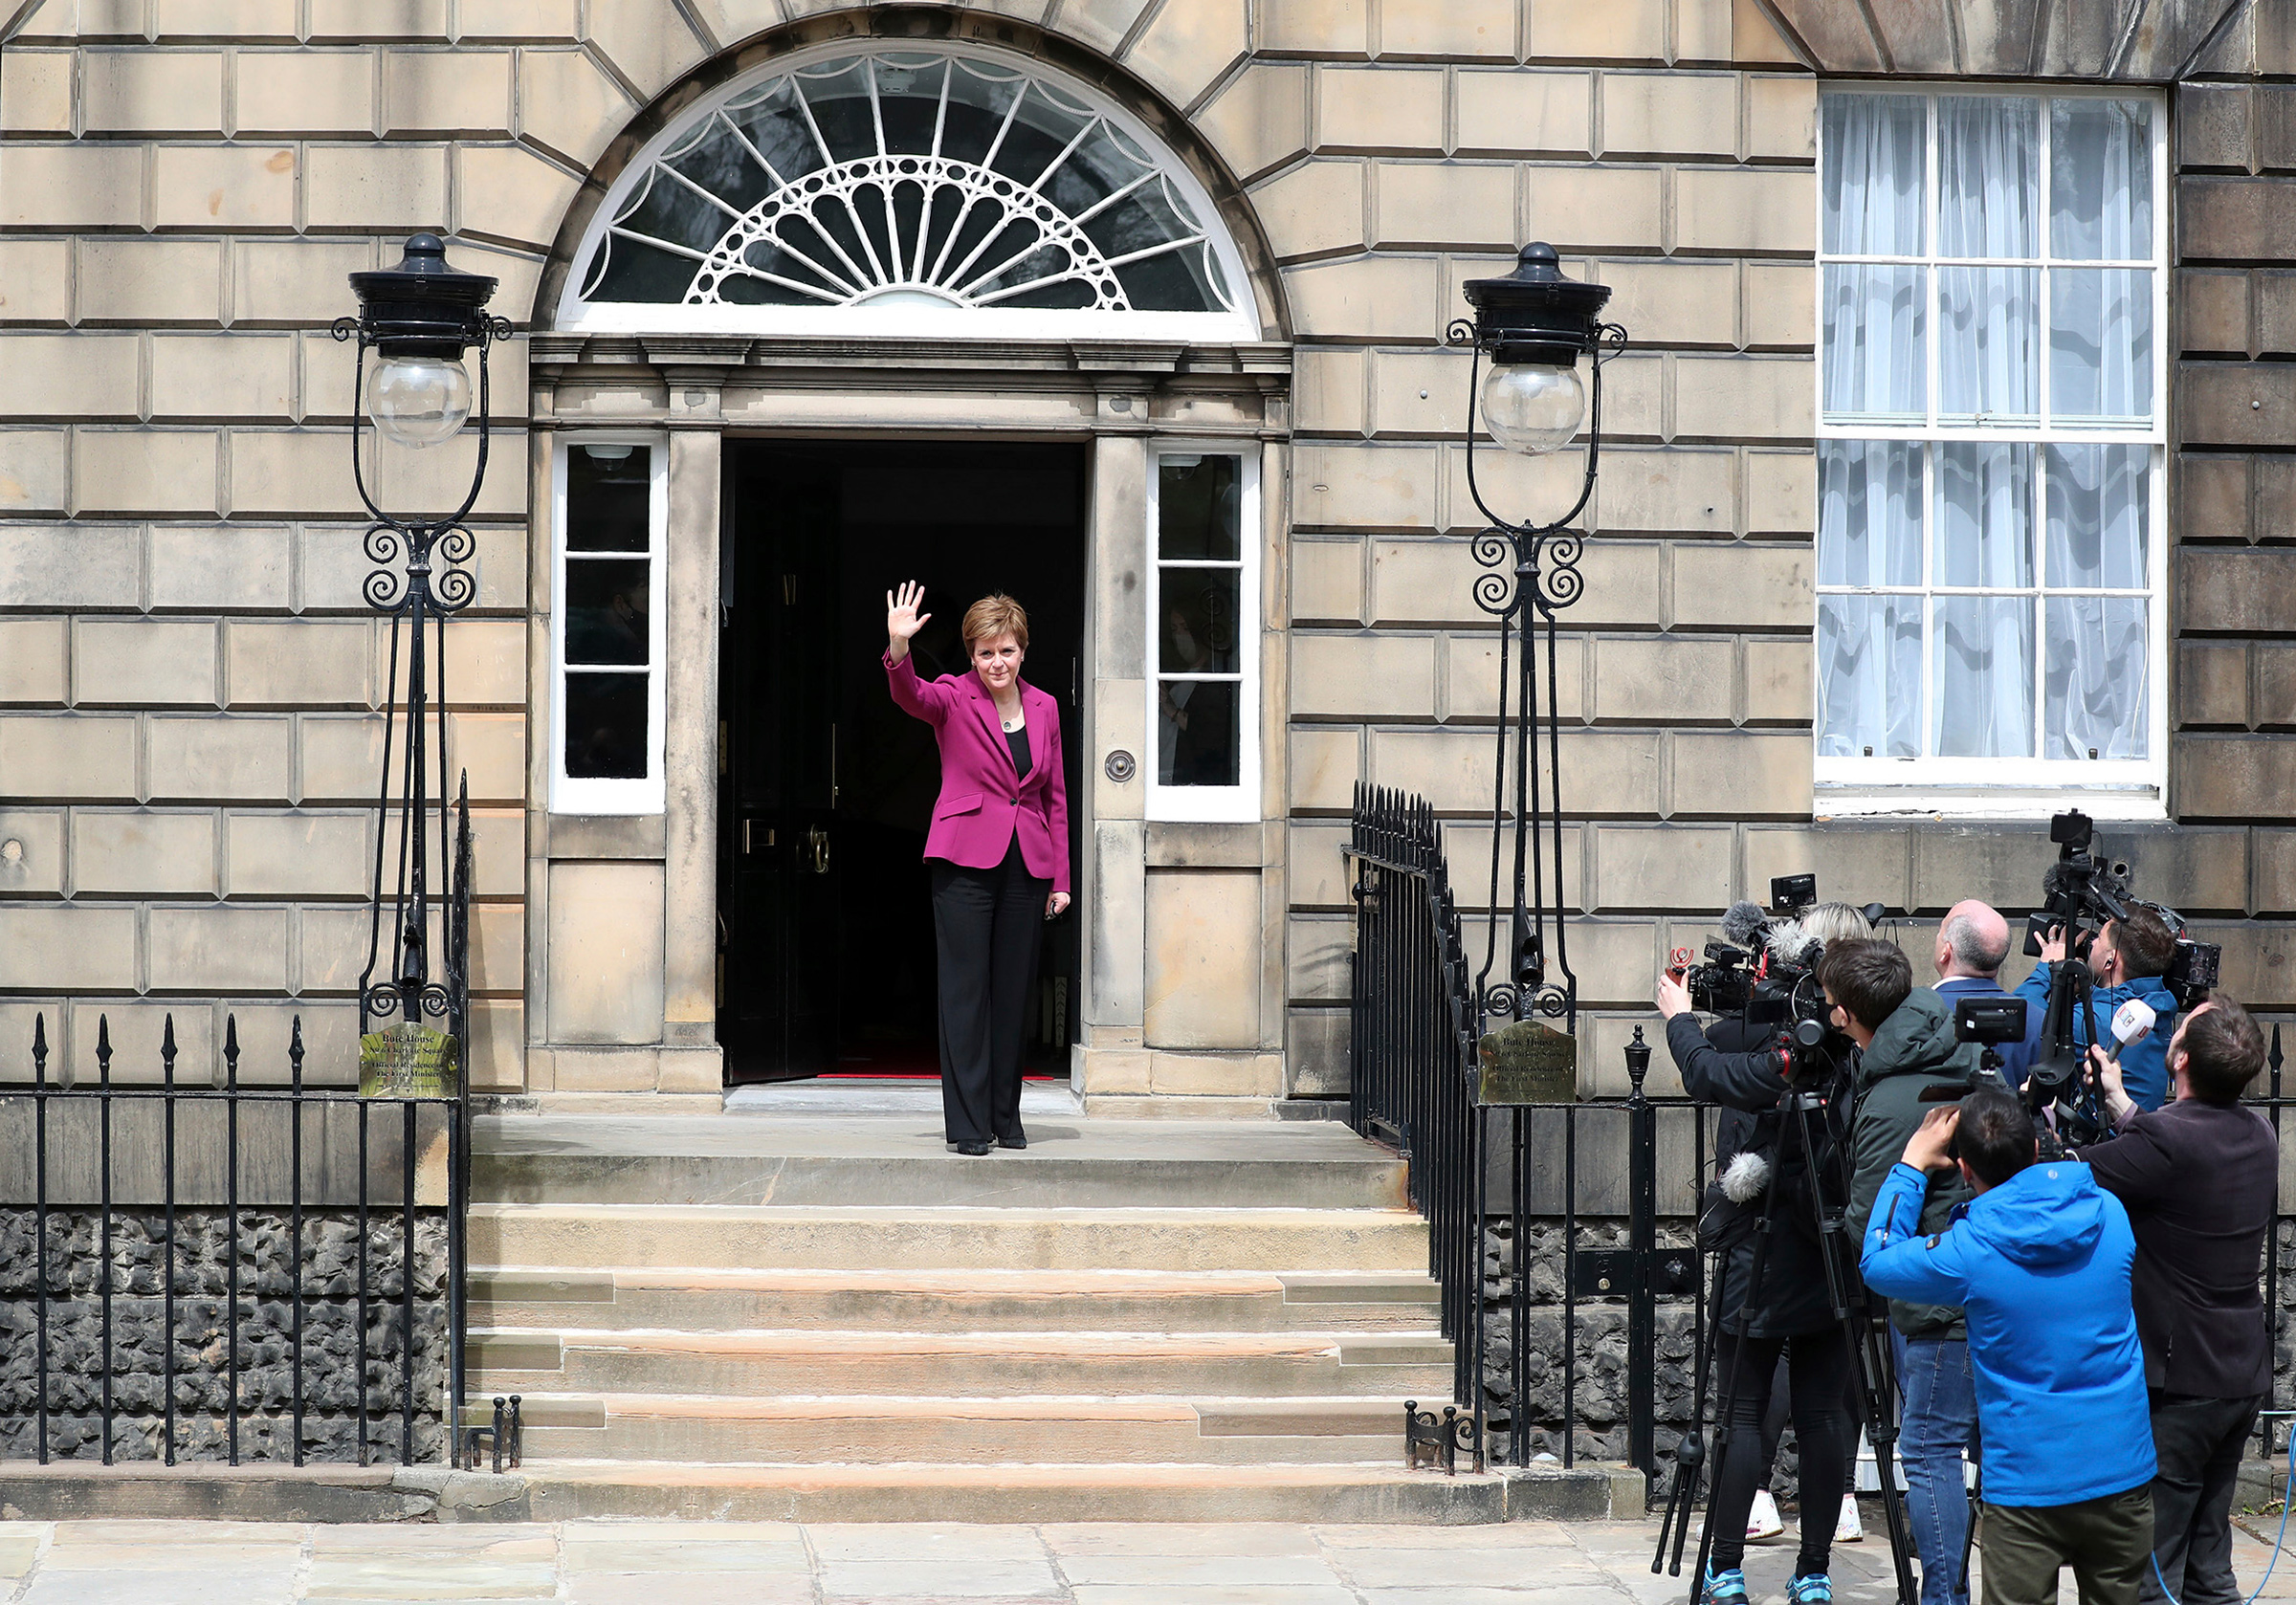 Scotland's First Minister and Scottish National Party leader Nicola Sturgeon poses for photographers at Bute House in Edinburgh on May 9. Sturgeon said the election results proved a second independence vote for Scotland was “the will of the country." (Scott Heppell—AP)